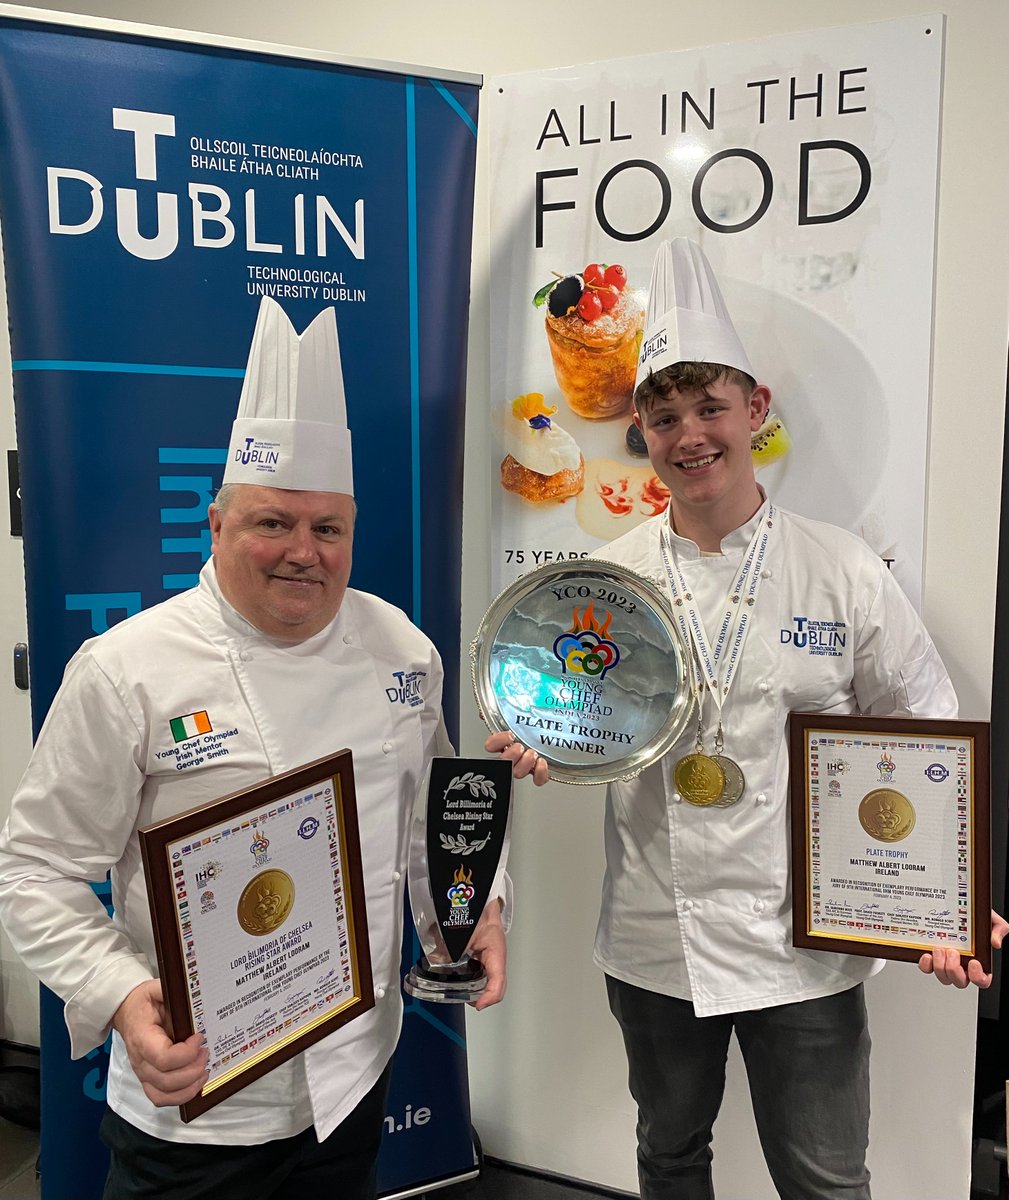 Congratulations to @wearetudublin Culinary Arts student Matthew Looram for winning awarded the Plate Trophy as well as the Rising Star Award at the recent 9th World Young Chef Olympiad (YCO) held in India! Tremendous achievement, well done! #culinaryarts #wearetudublin #yco